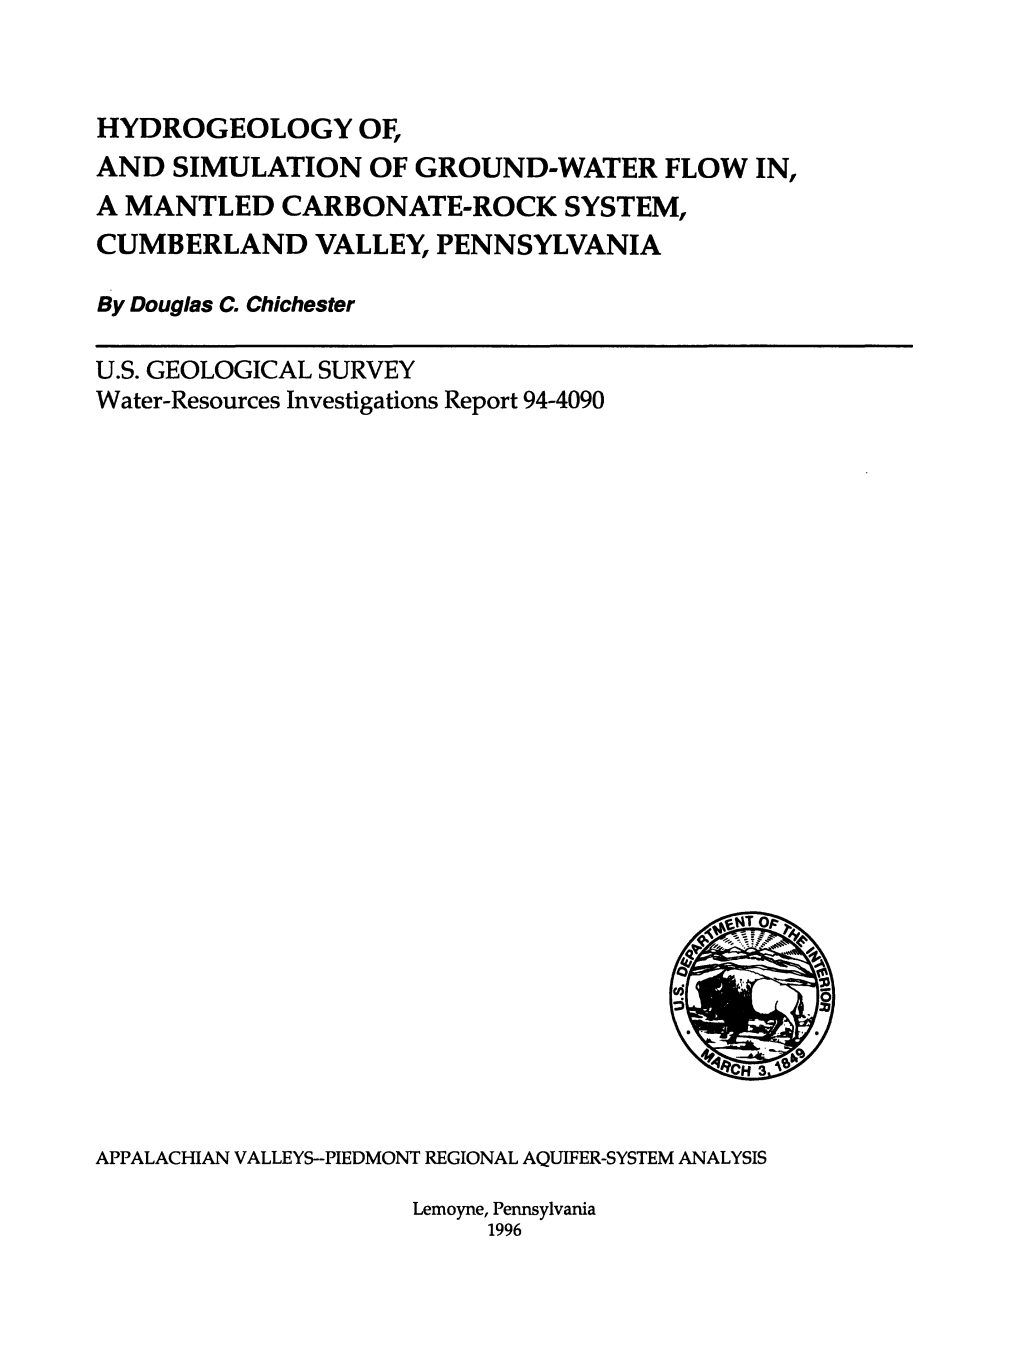 Hydrogeology Of, and Simulation of Ground-Water Flow In, a Mantled Carbonate-Rock System, Cumberland Valley, Pennsylvania